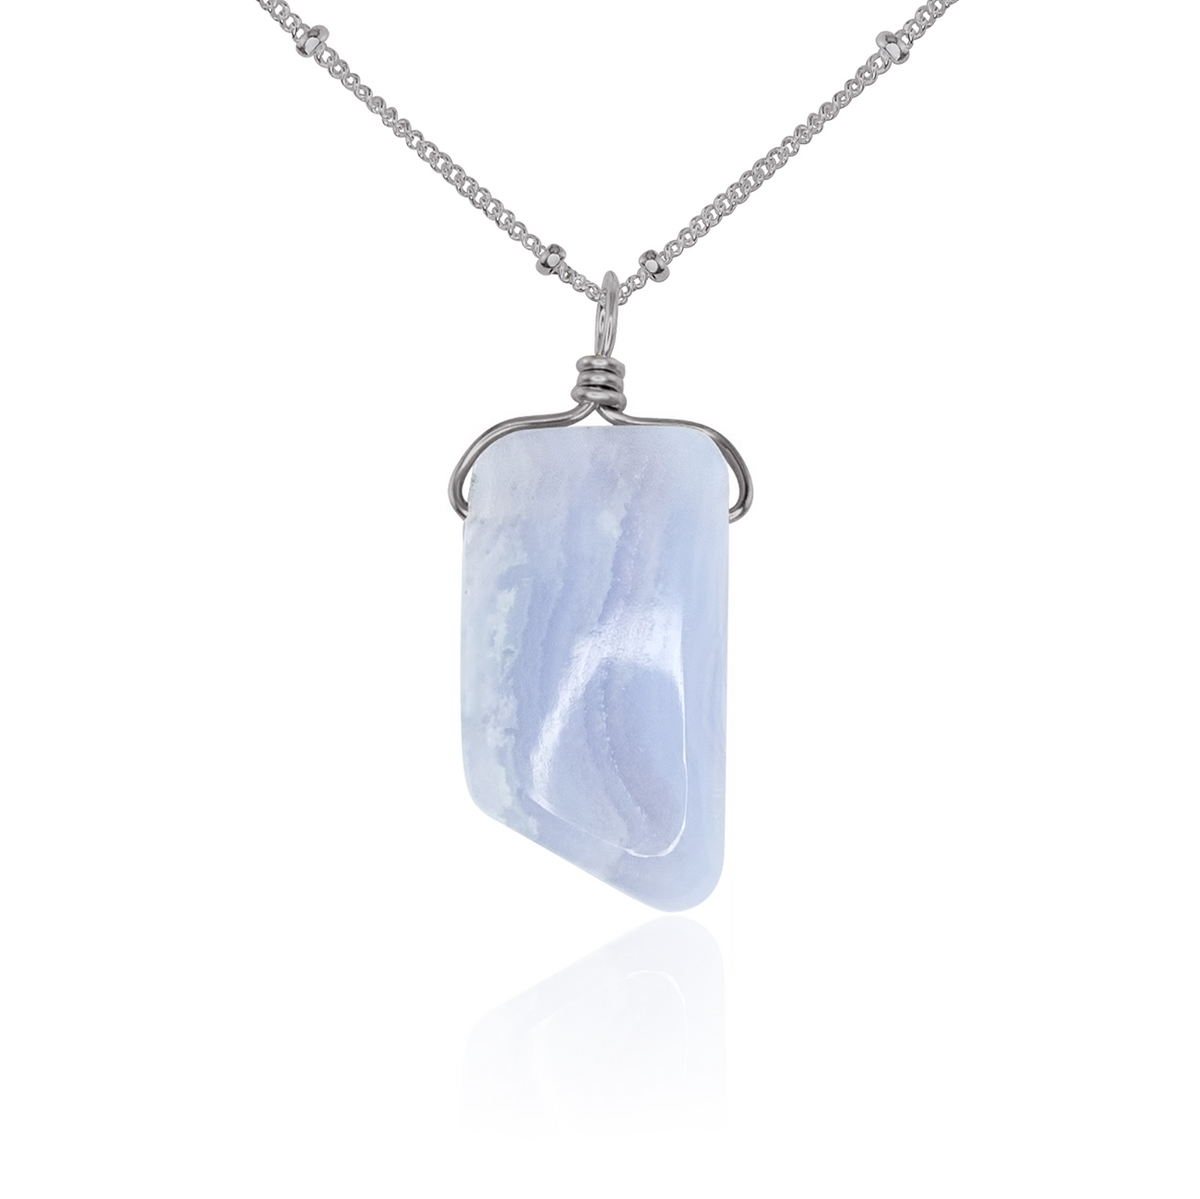 Small Smooth Blue Lace Agate Gentle Point Crystal Pendant Necklace